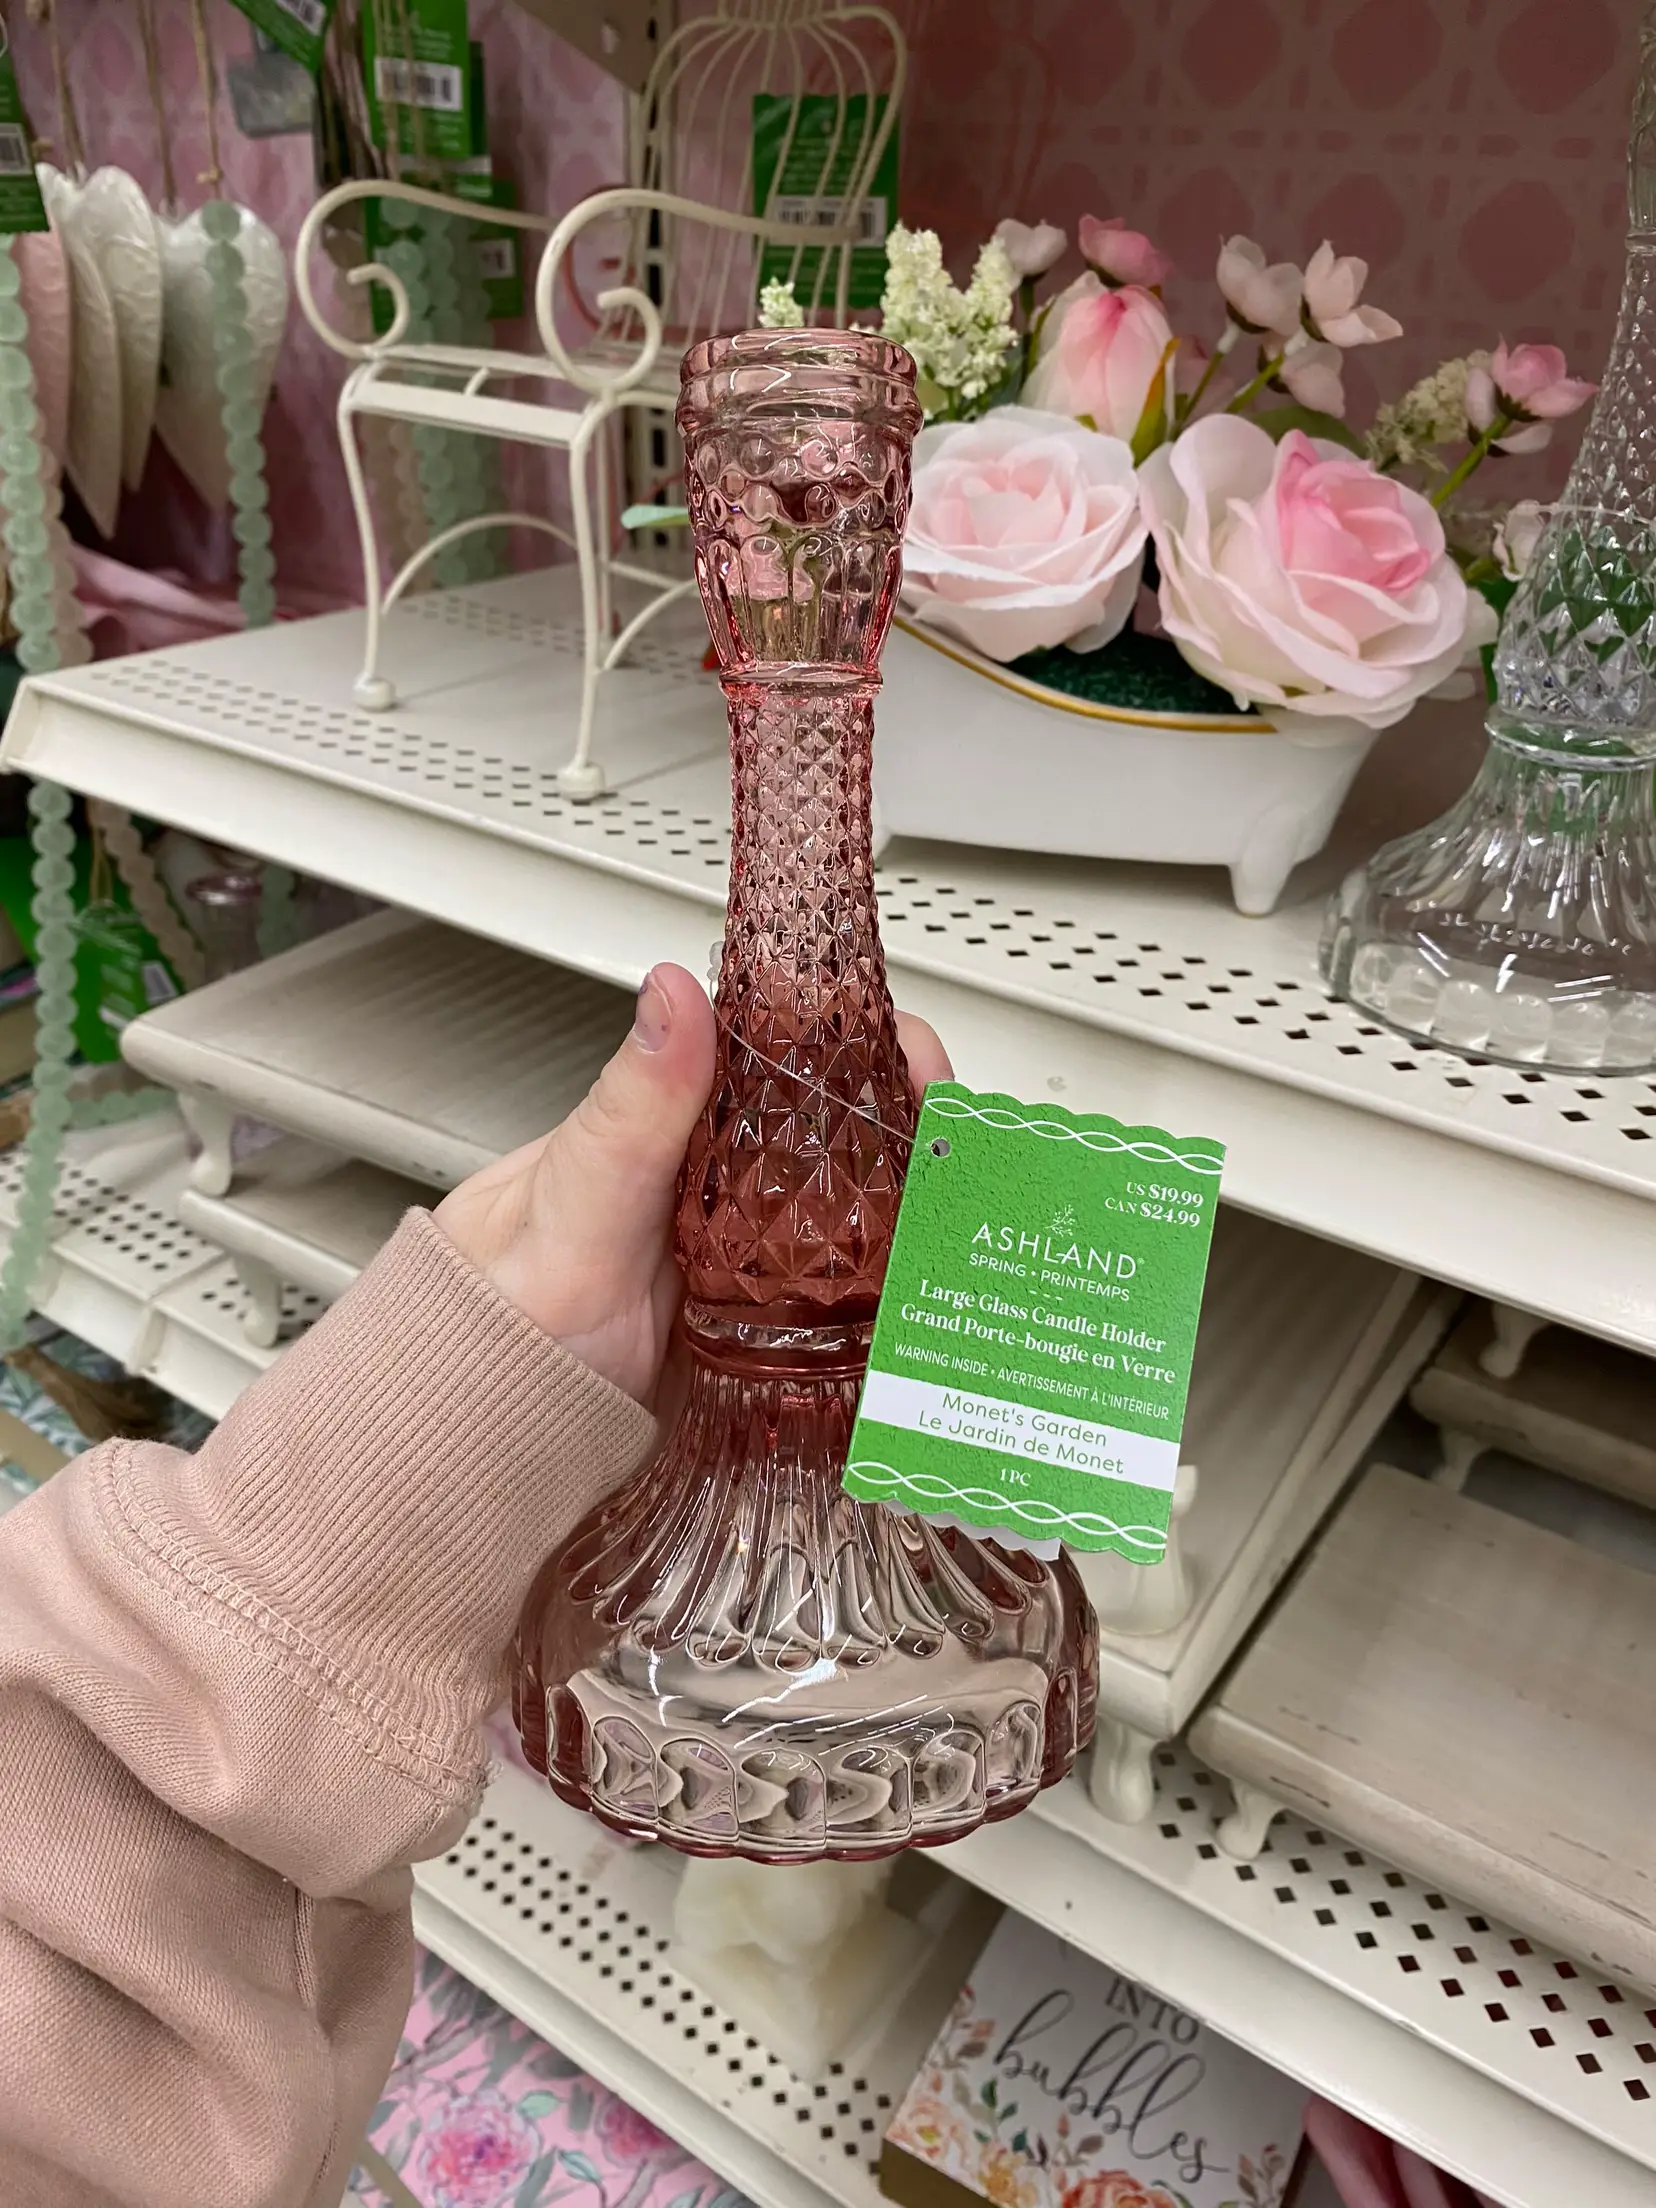  A hand holding a pink glass vase.